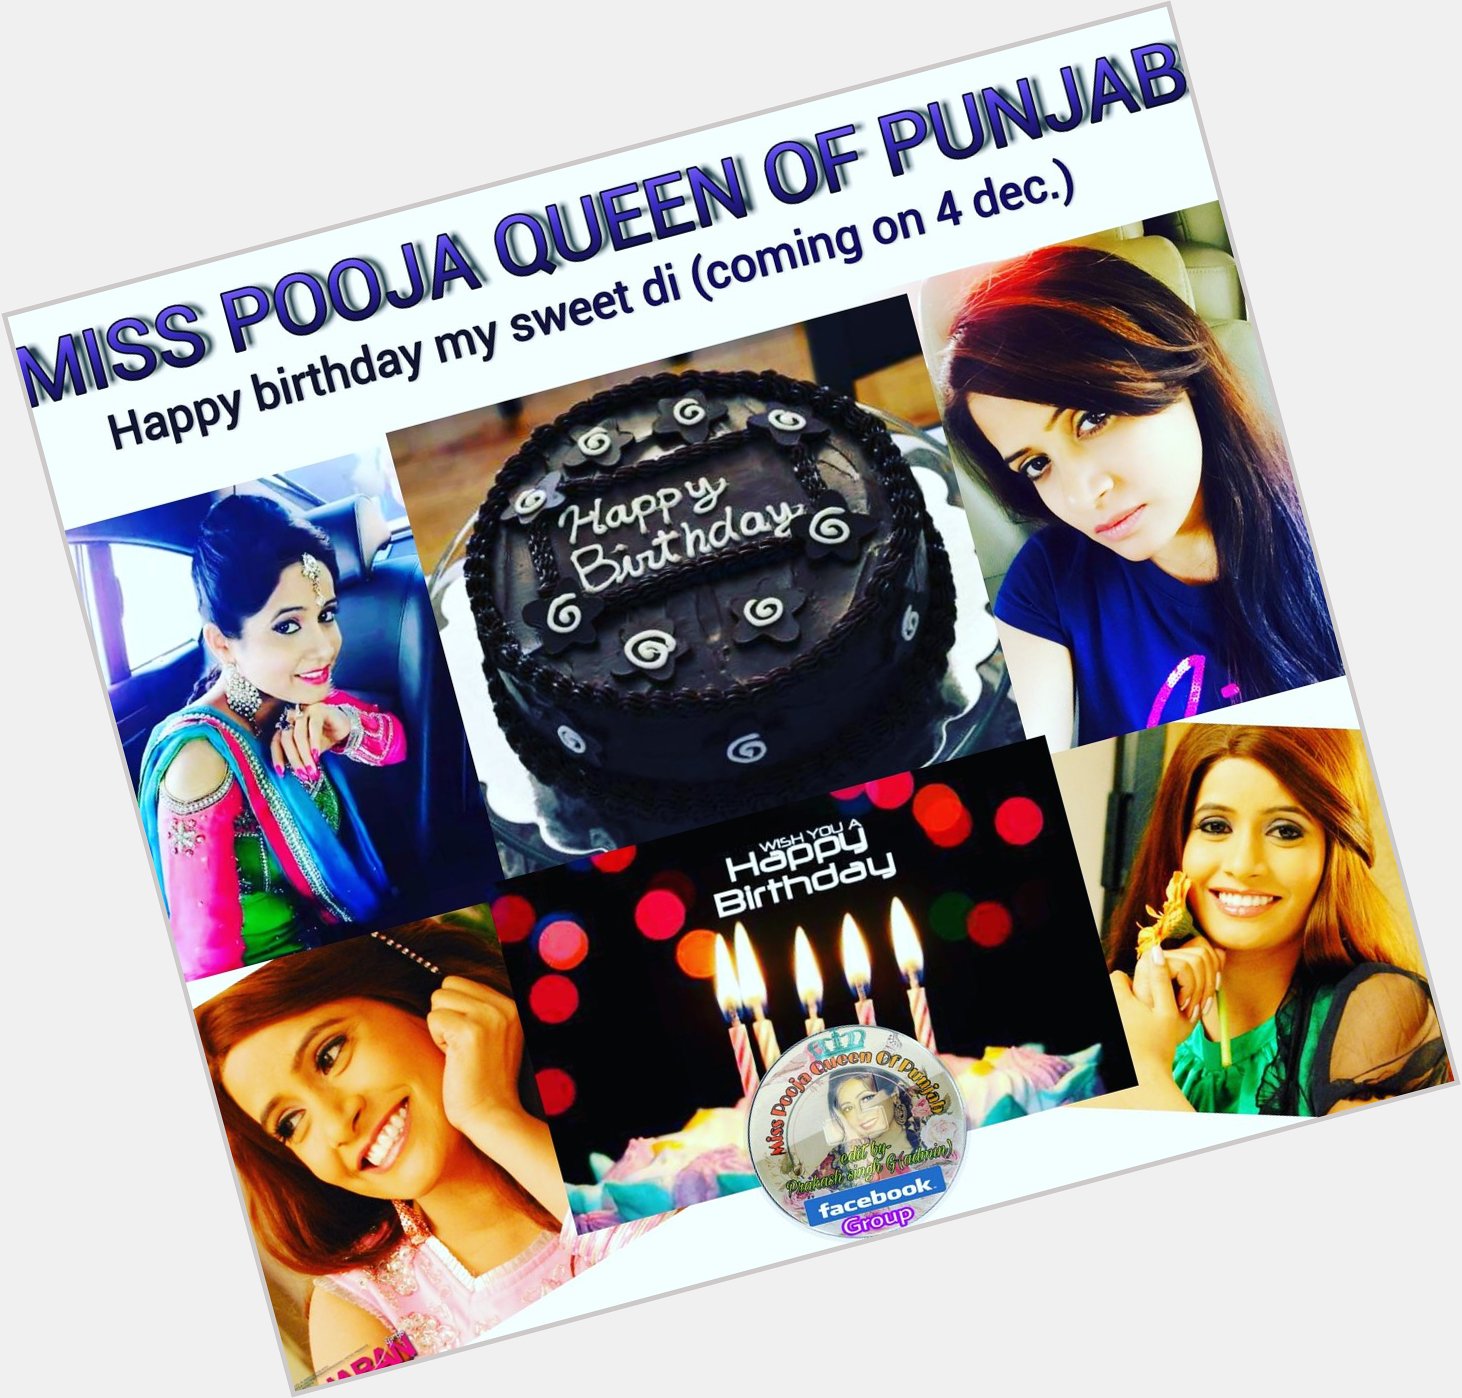  COOMING SOON (4 Dec ....)
Happy birthday My
MISS POOJA QUEEN OF PUNJAB 
Advance Wish To You... 